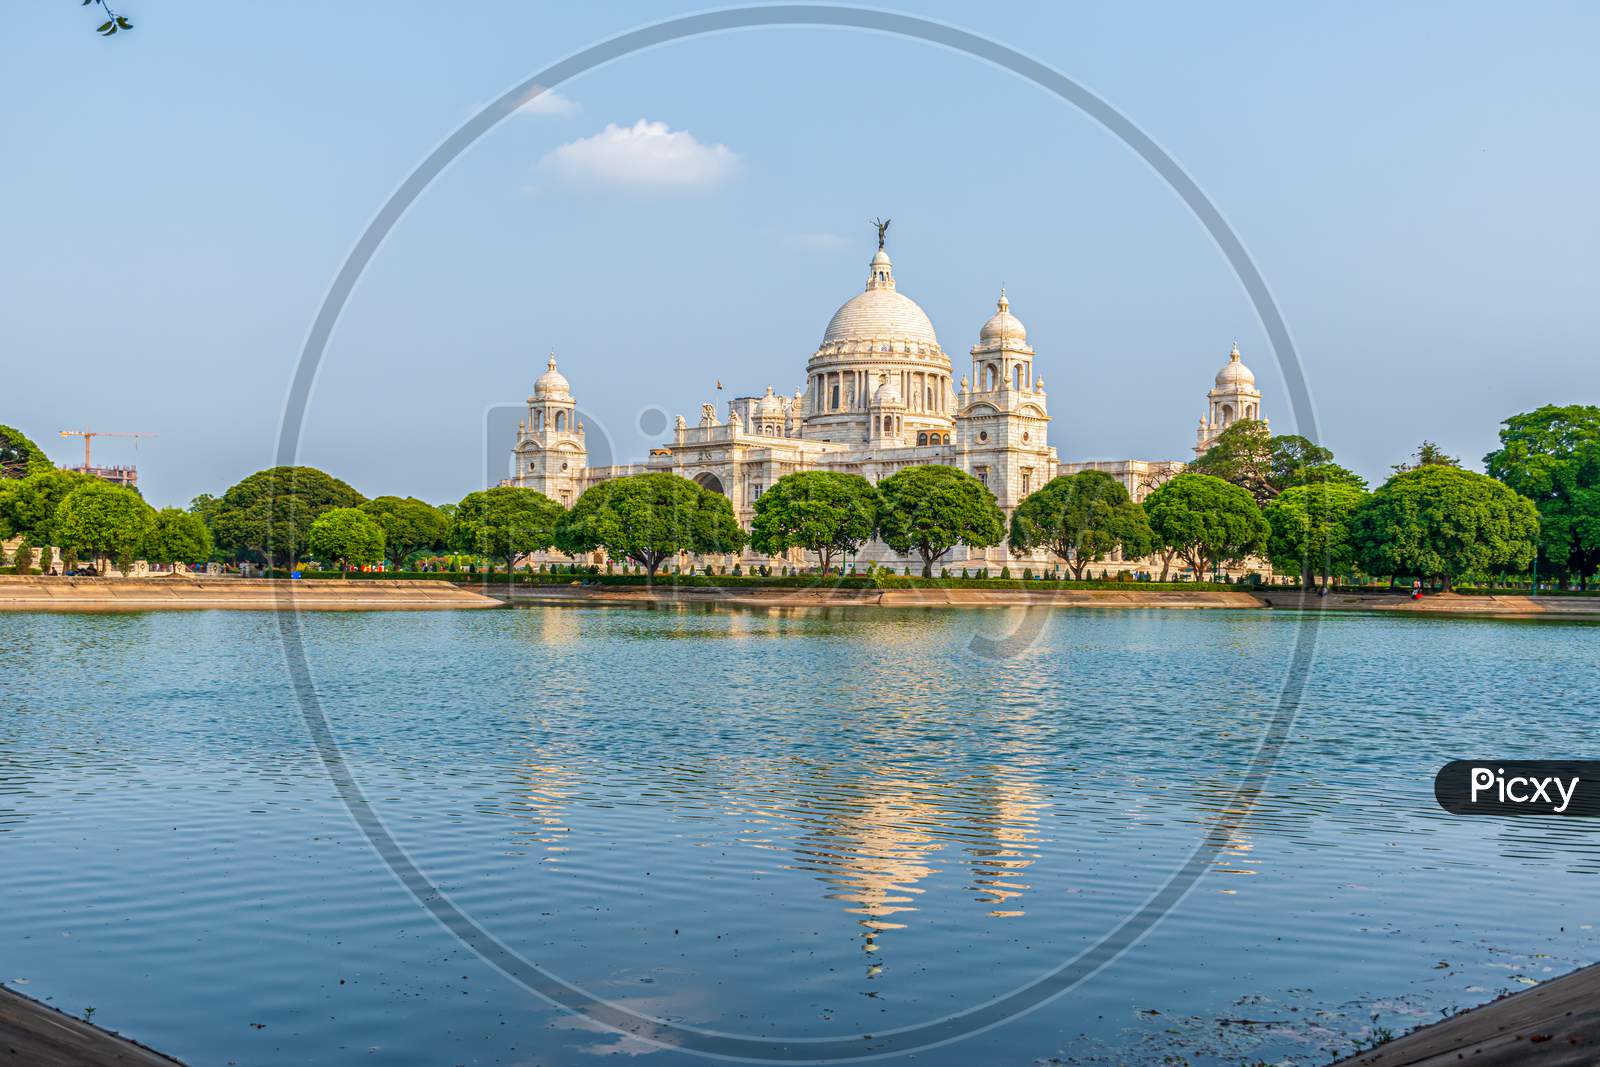 View Of Victoria Memorial Kolkata With Vibrant Moody Sky In The Background. Victoria Memorial Is A Monument And Museum Built In The Memory Of Queen Victoria In 1921 At Kolkata In India